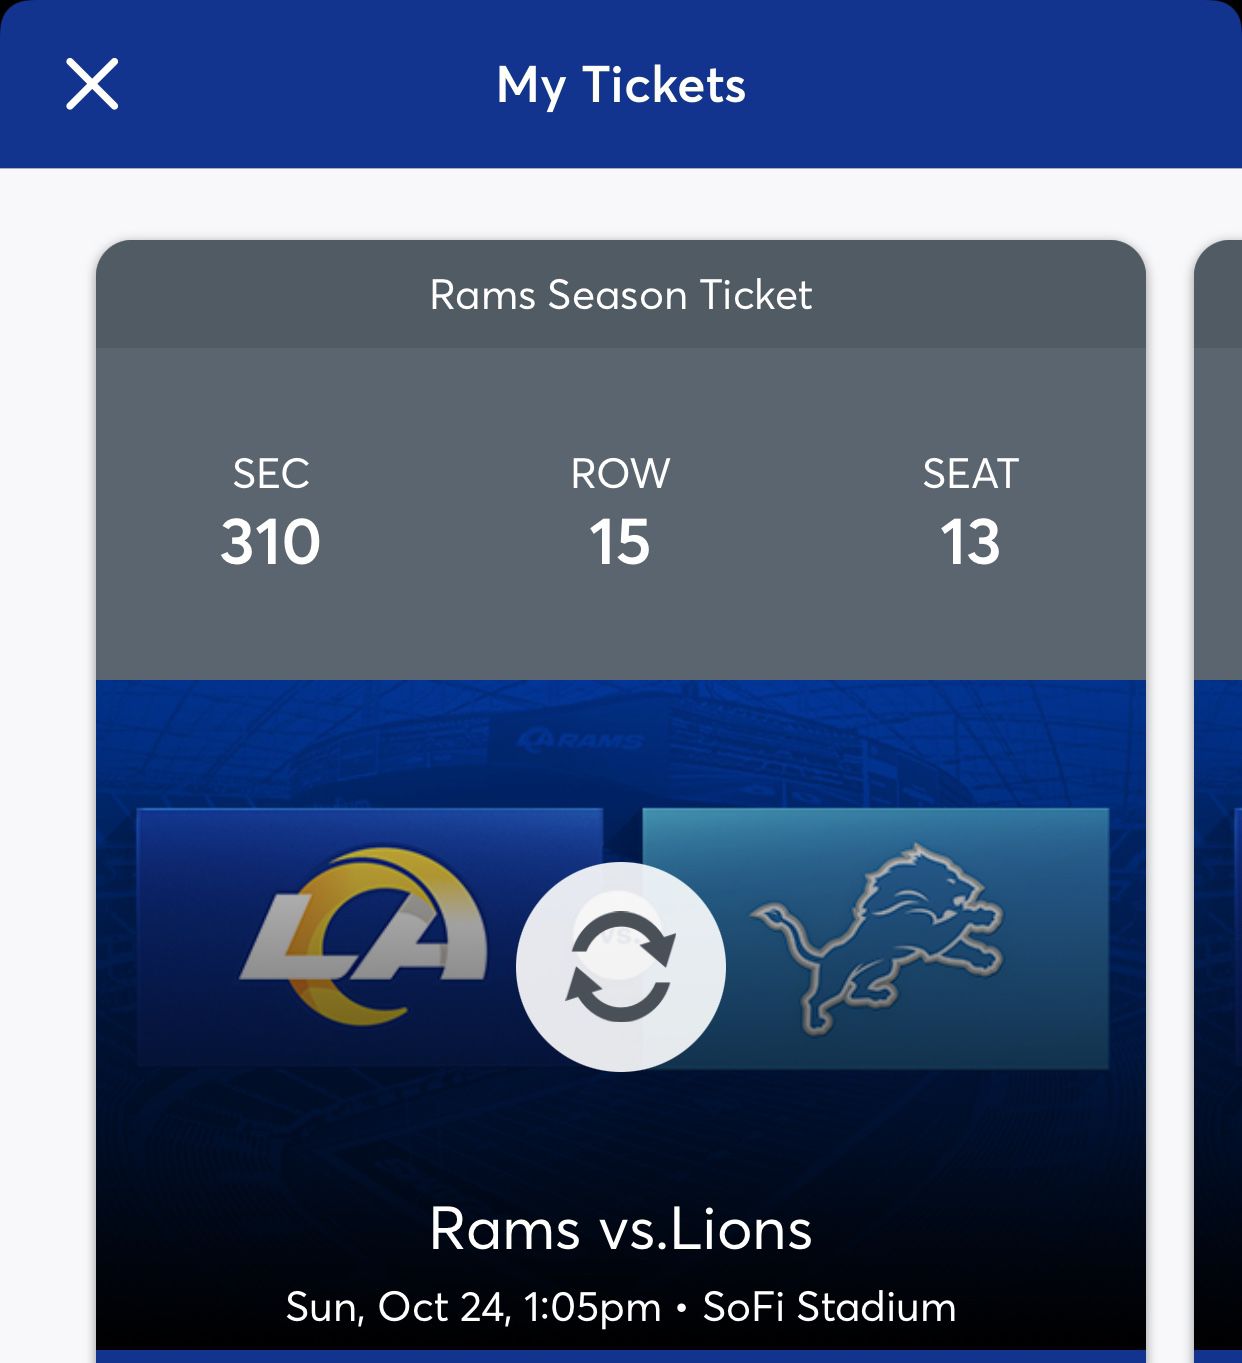 Rams Vs Lions Tickets On Sale. $300 For All 3!